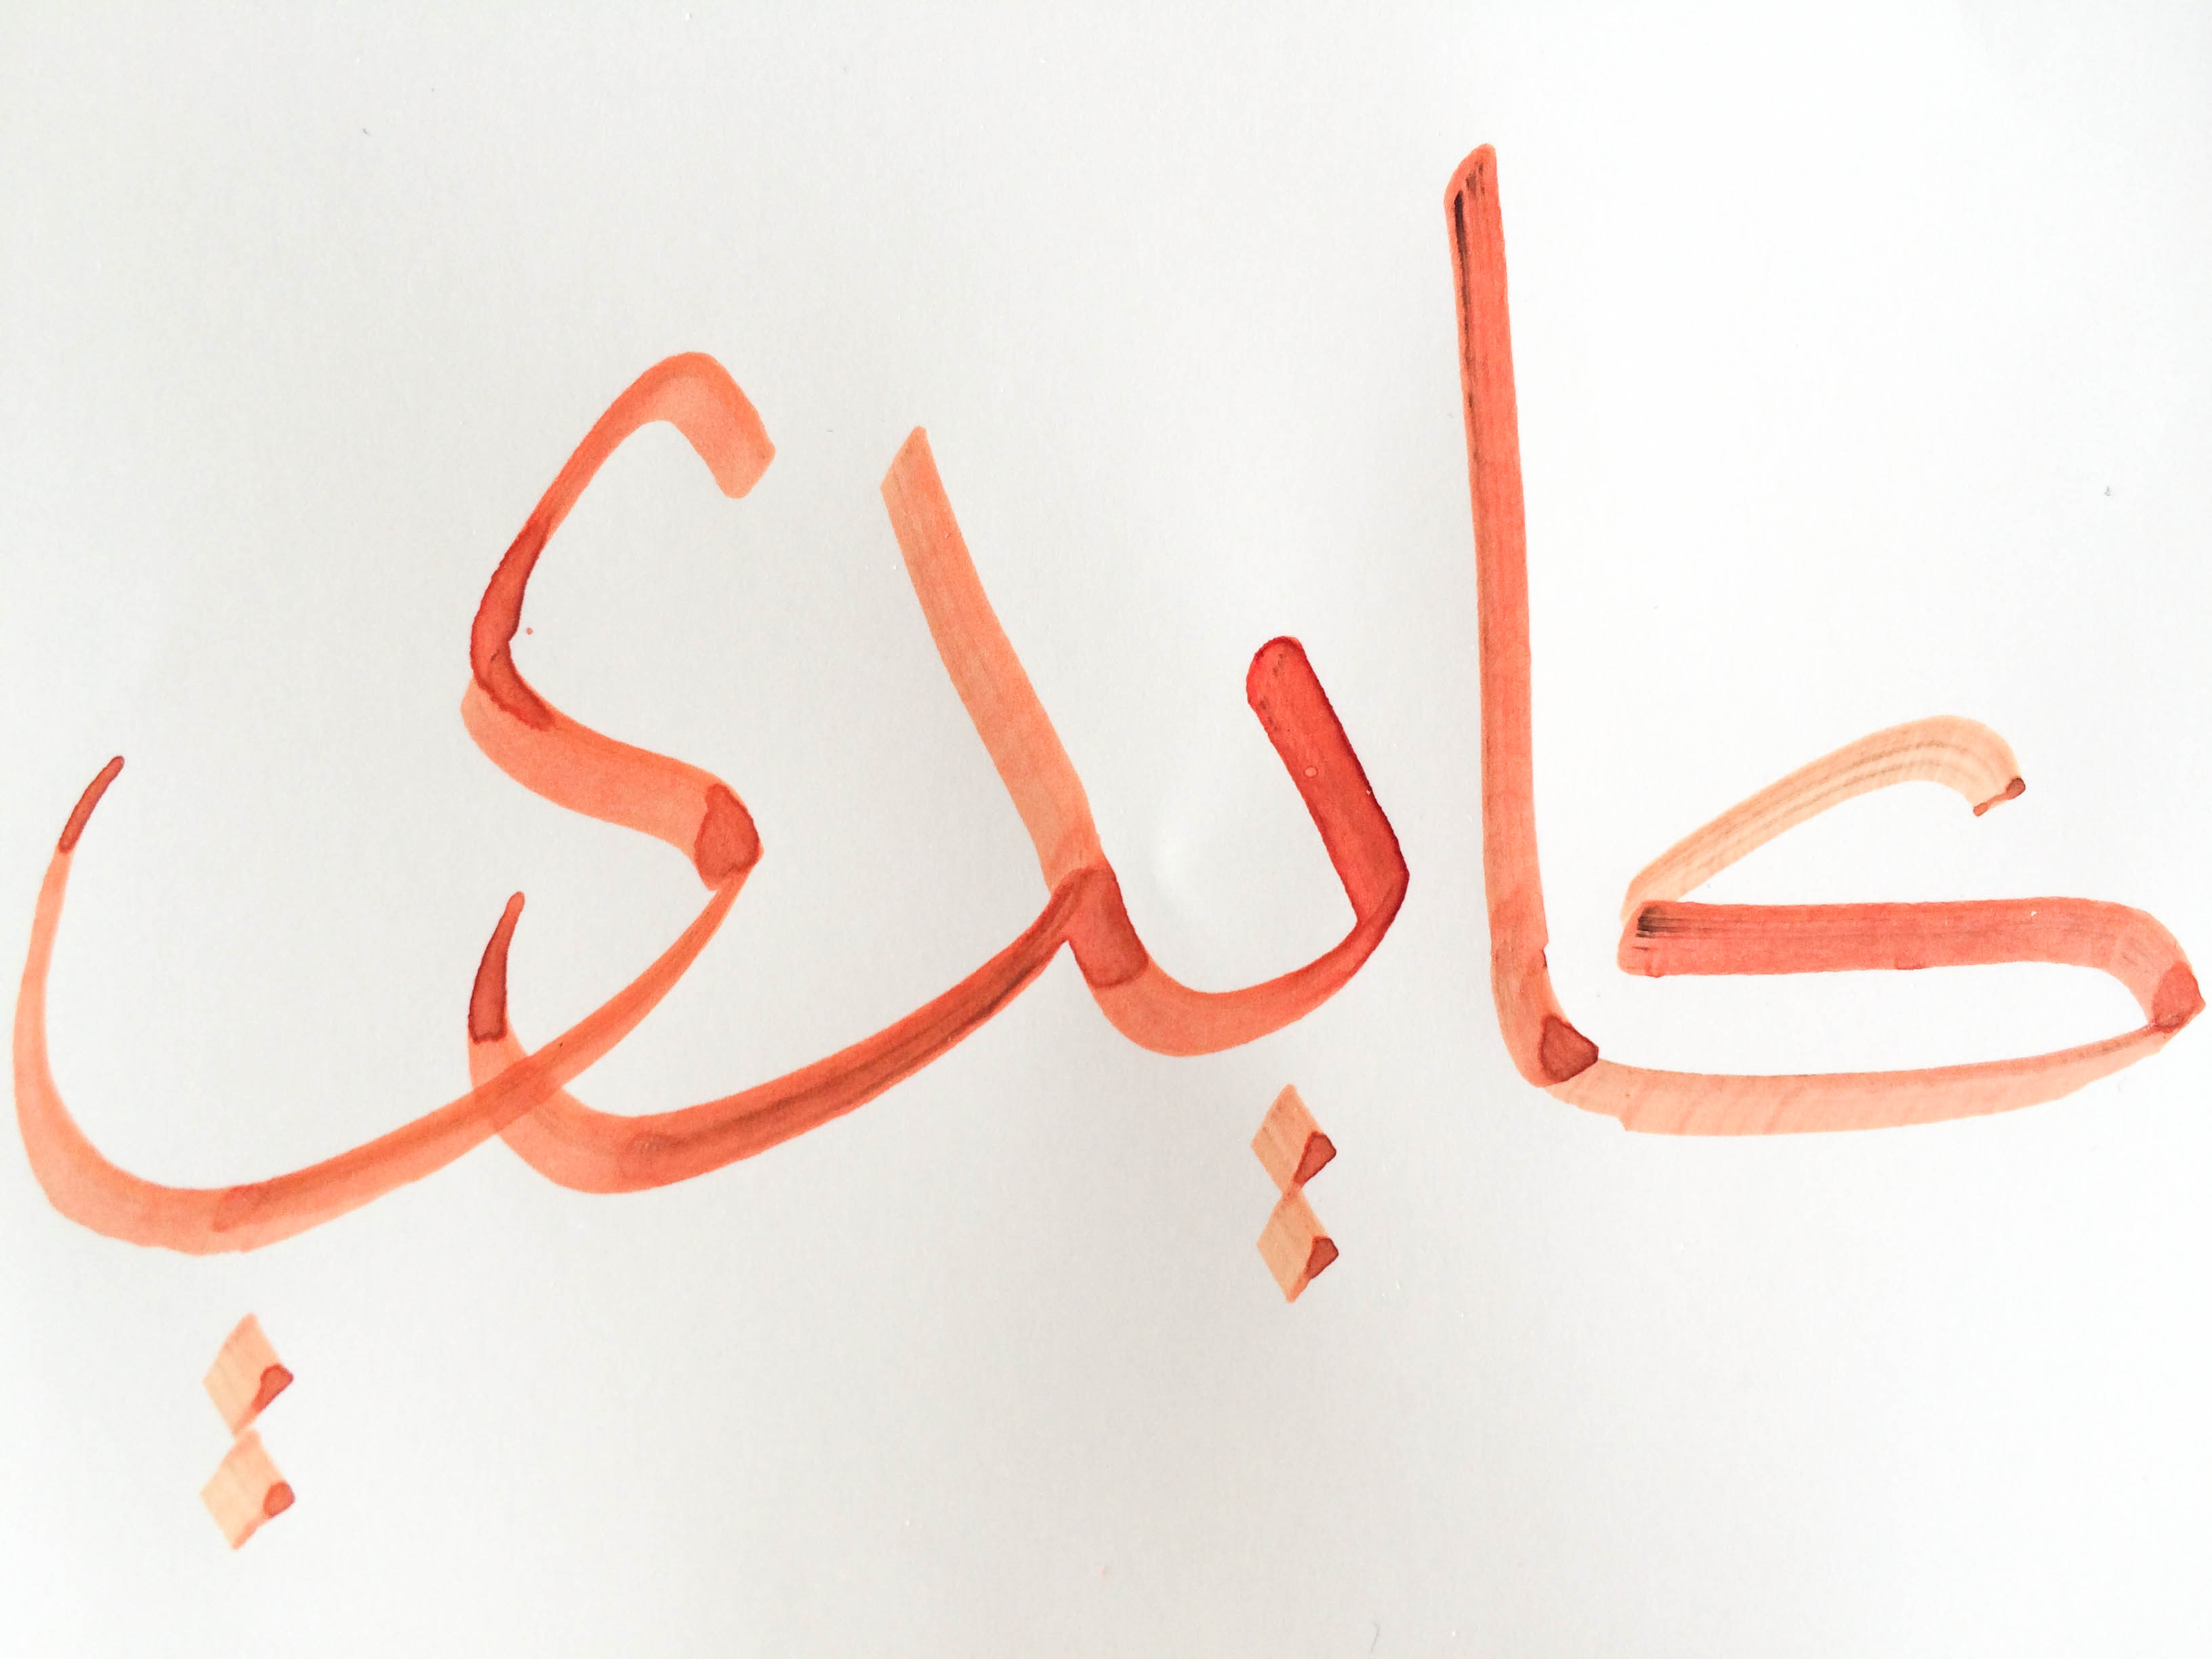 one of the volunteers was teaching Arabic calligraphy and he wrote my name in Arabic. The Arabic calligraphy class was just one of the sessions offered at the Bed Talks hosted by The Student Hotel in Amsterdam